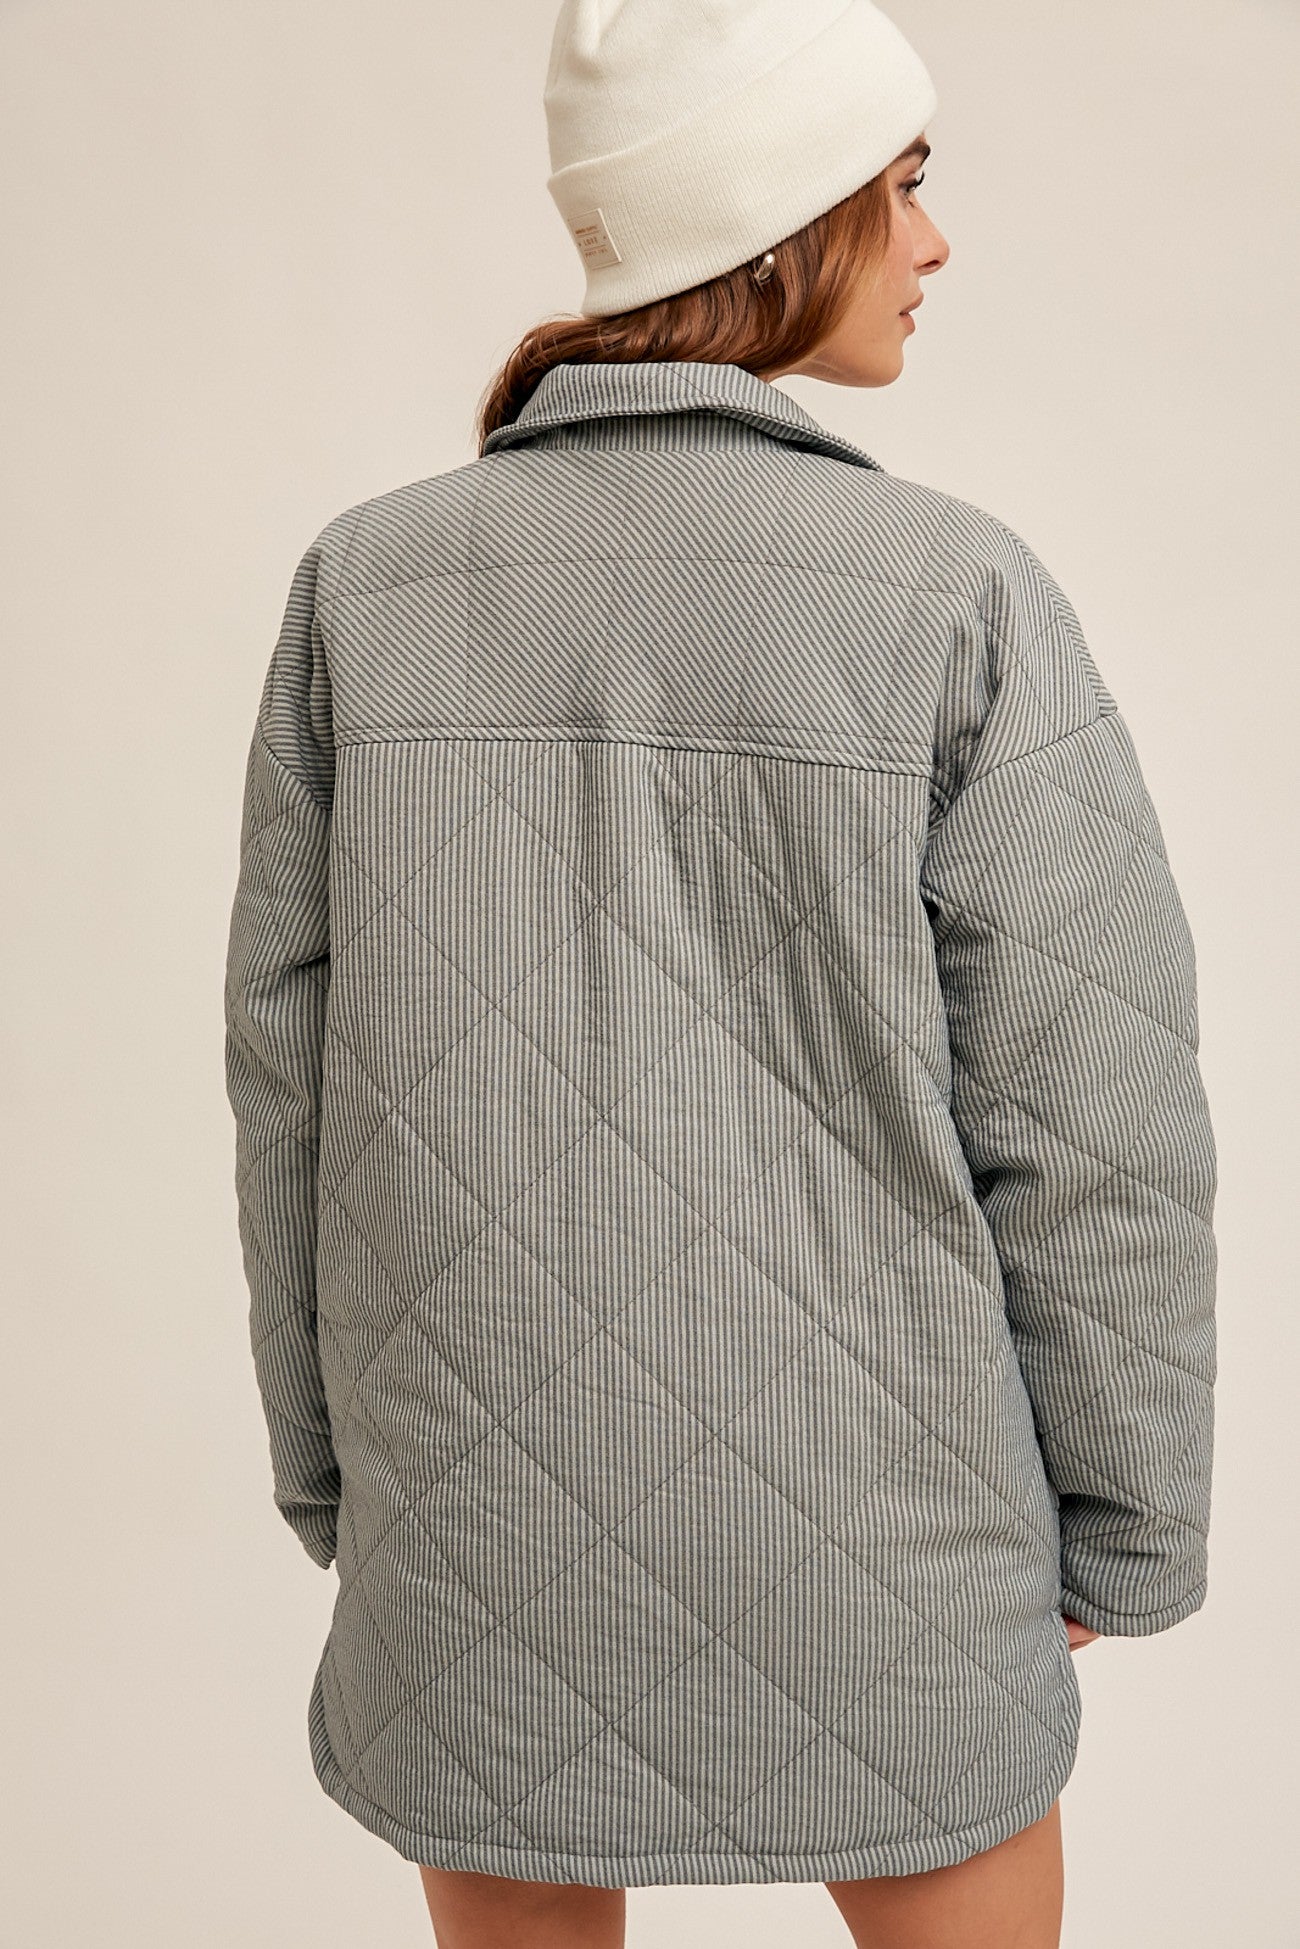 Quilted Stripe Snap Button Down Jacket - Storm and Sky Shoppe